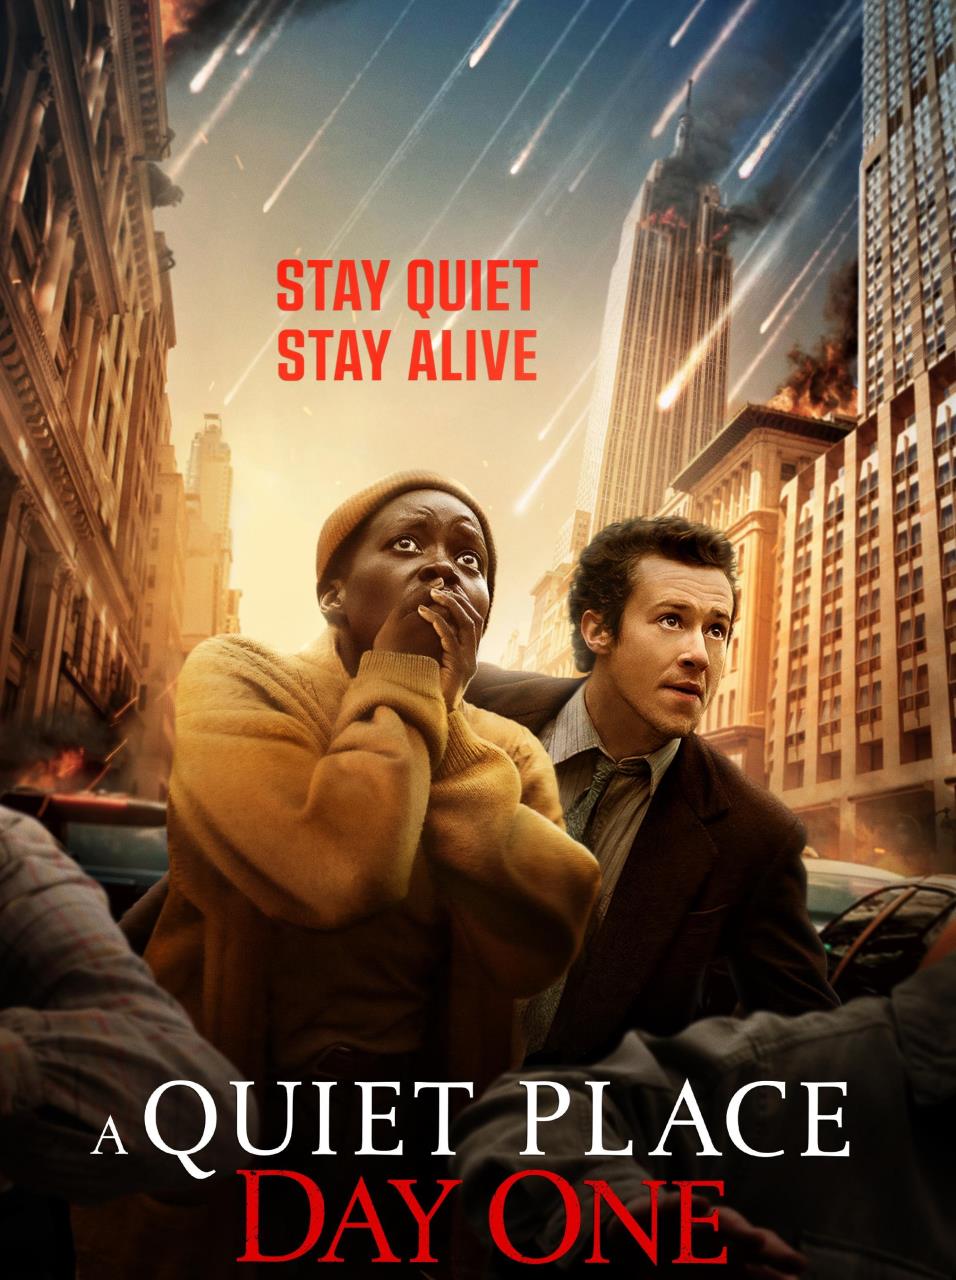 Movie - A Quiet Place: Day One